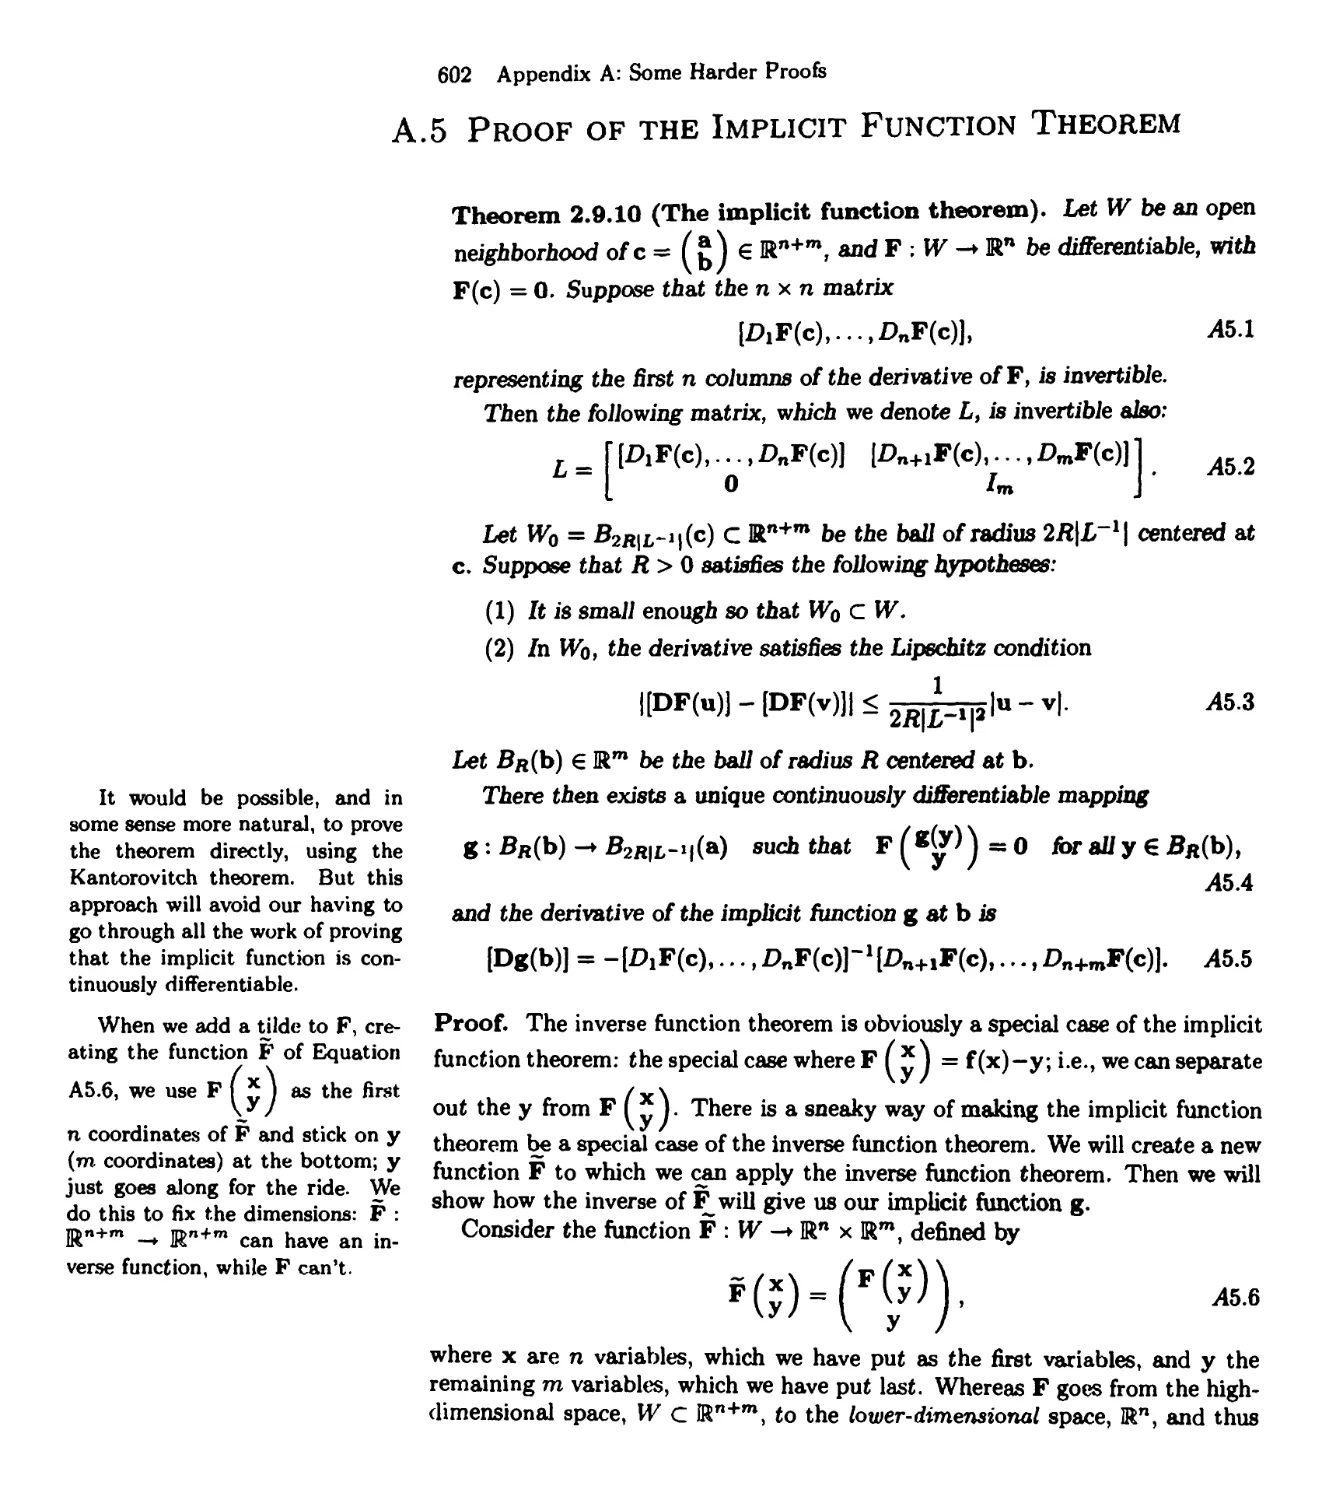 A.5 Proof of the Implicit Function Theorem